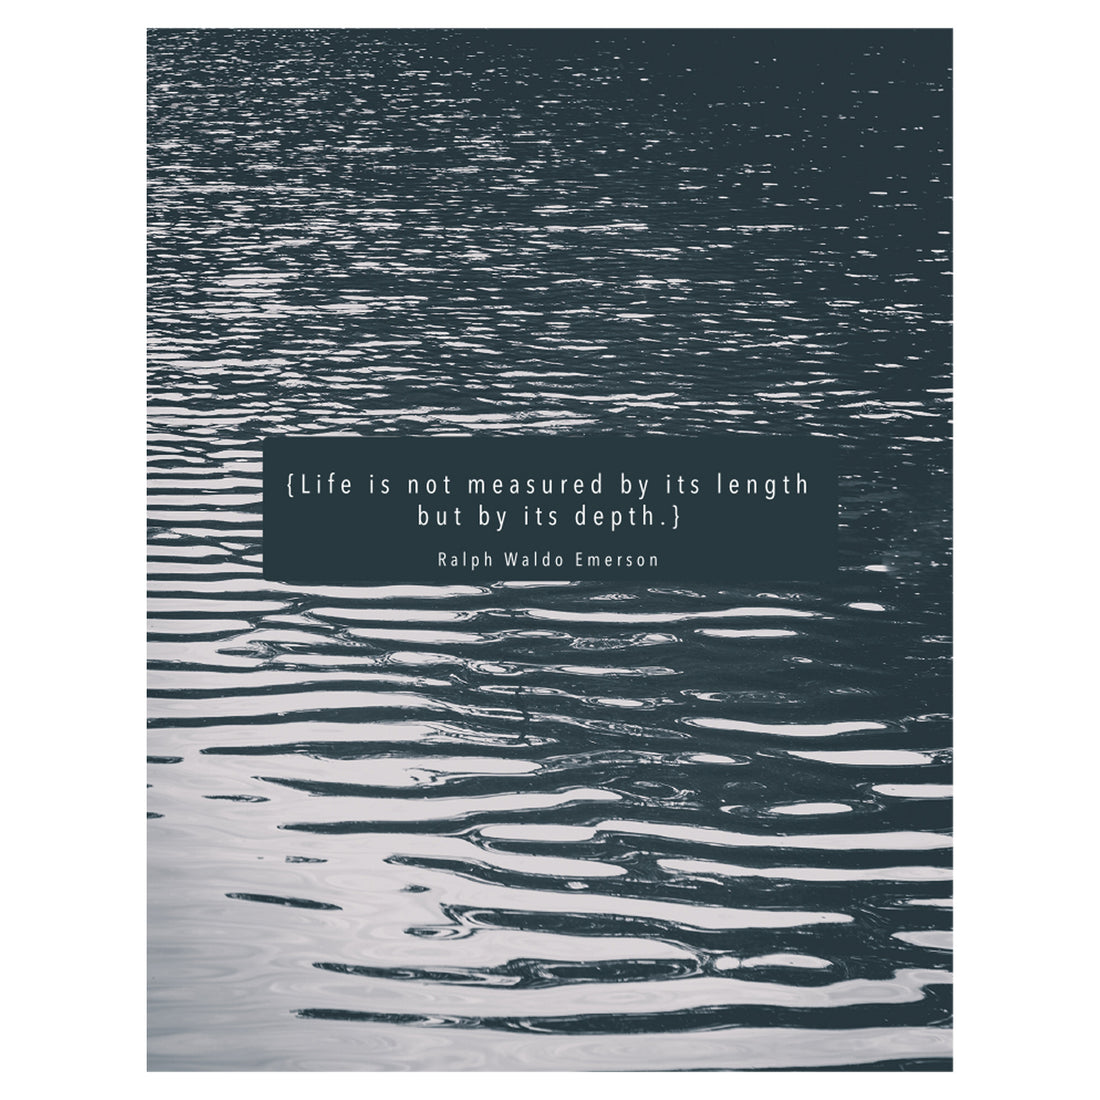 A black and white photo of a body of water full of ripples, with &quot;{Life is not measured by its length but by its depth.} Ralph Waldo Emerson&quot; printed in white over a dark grey rectangle in the center of the card.